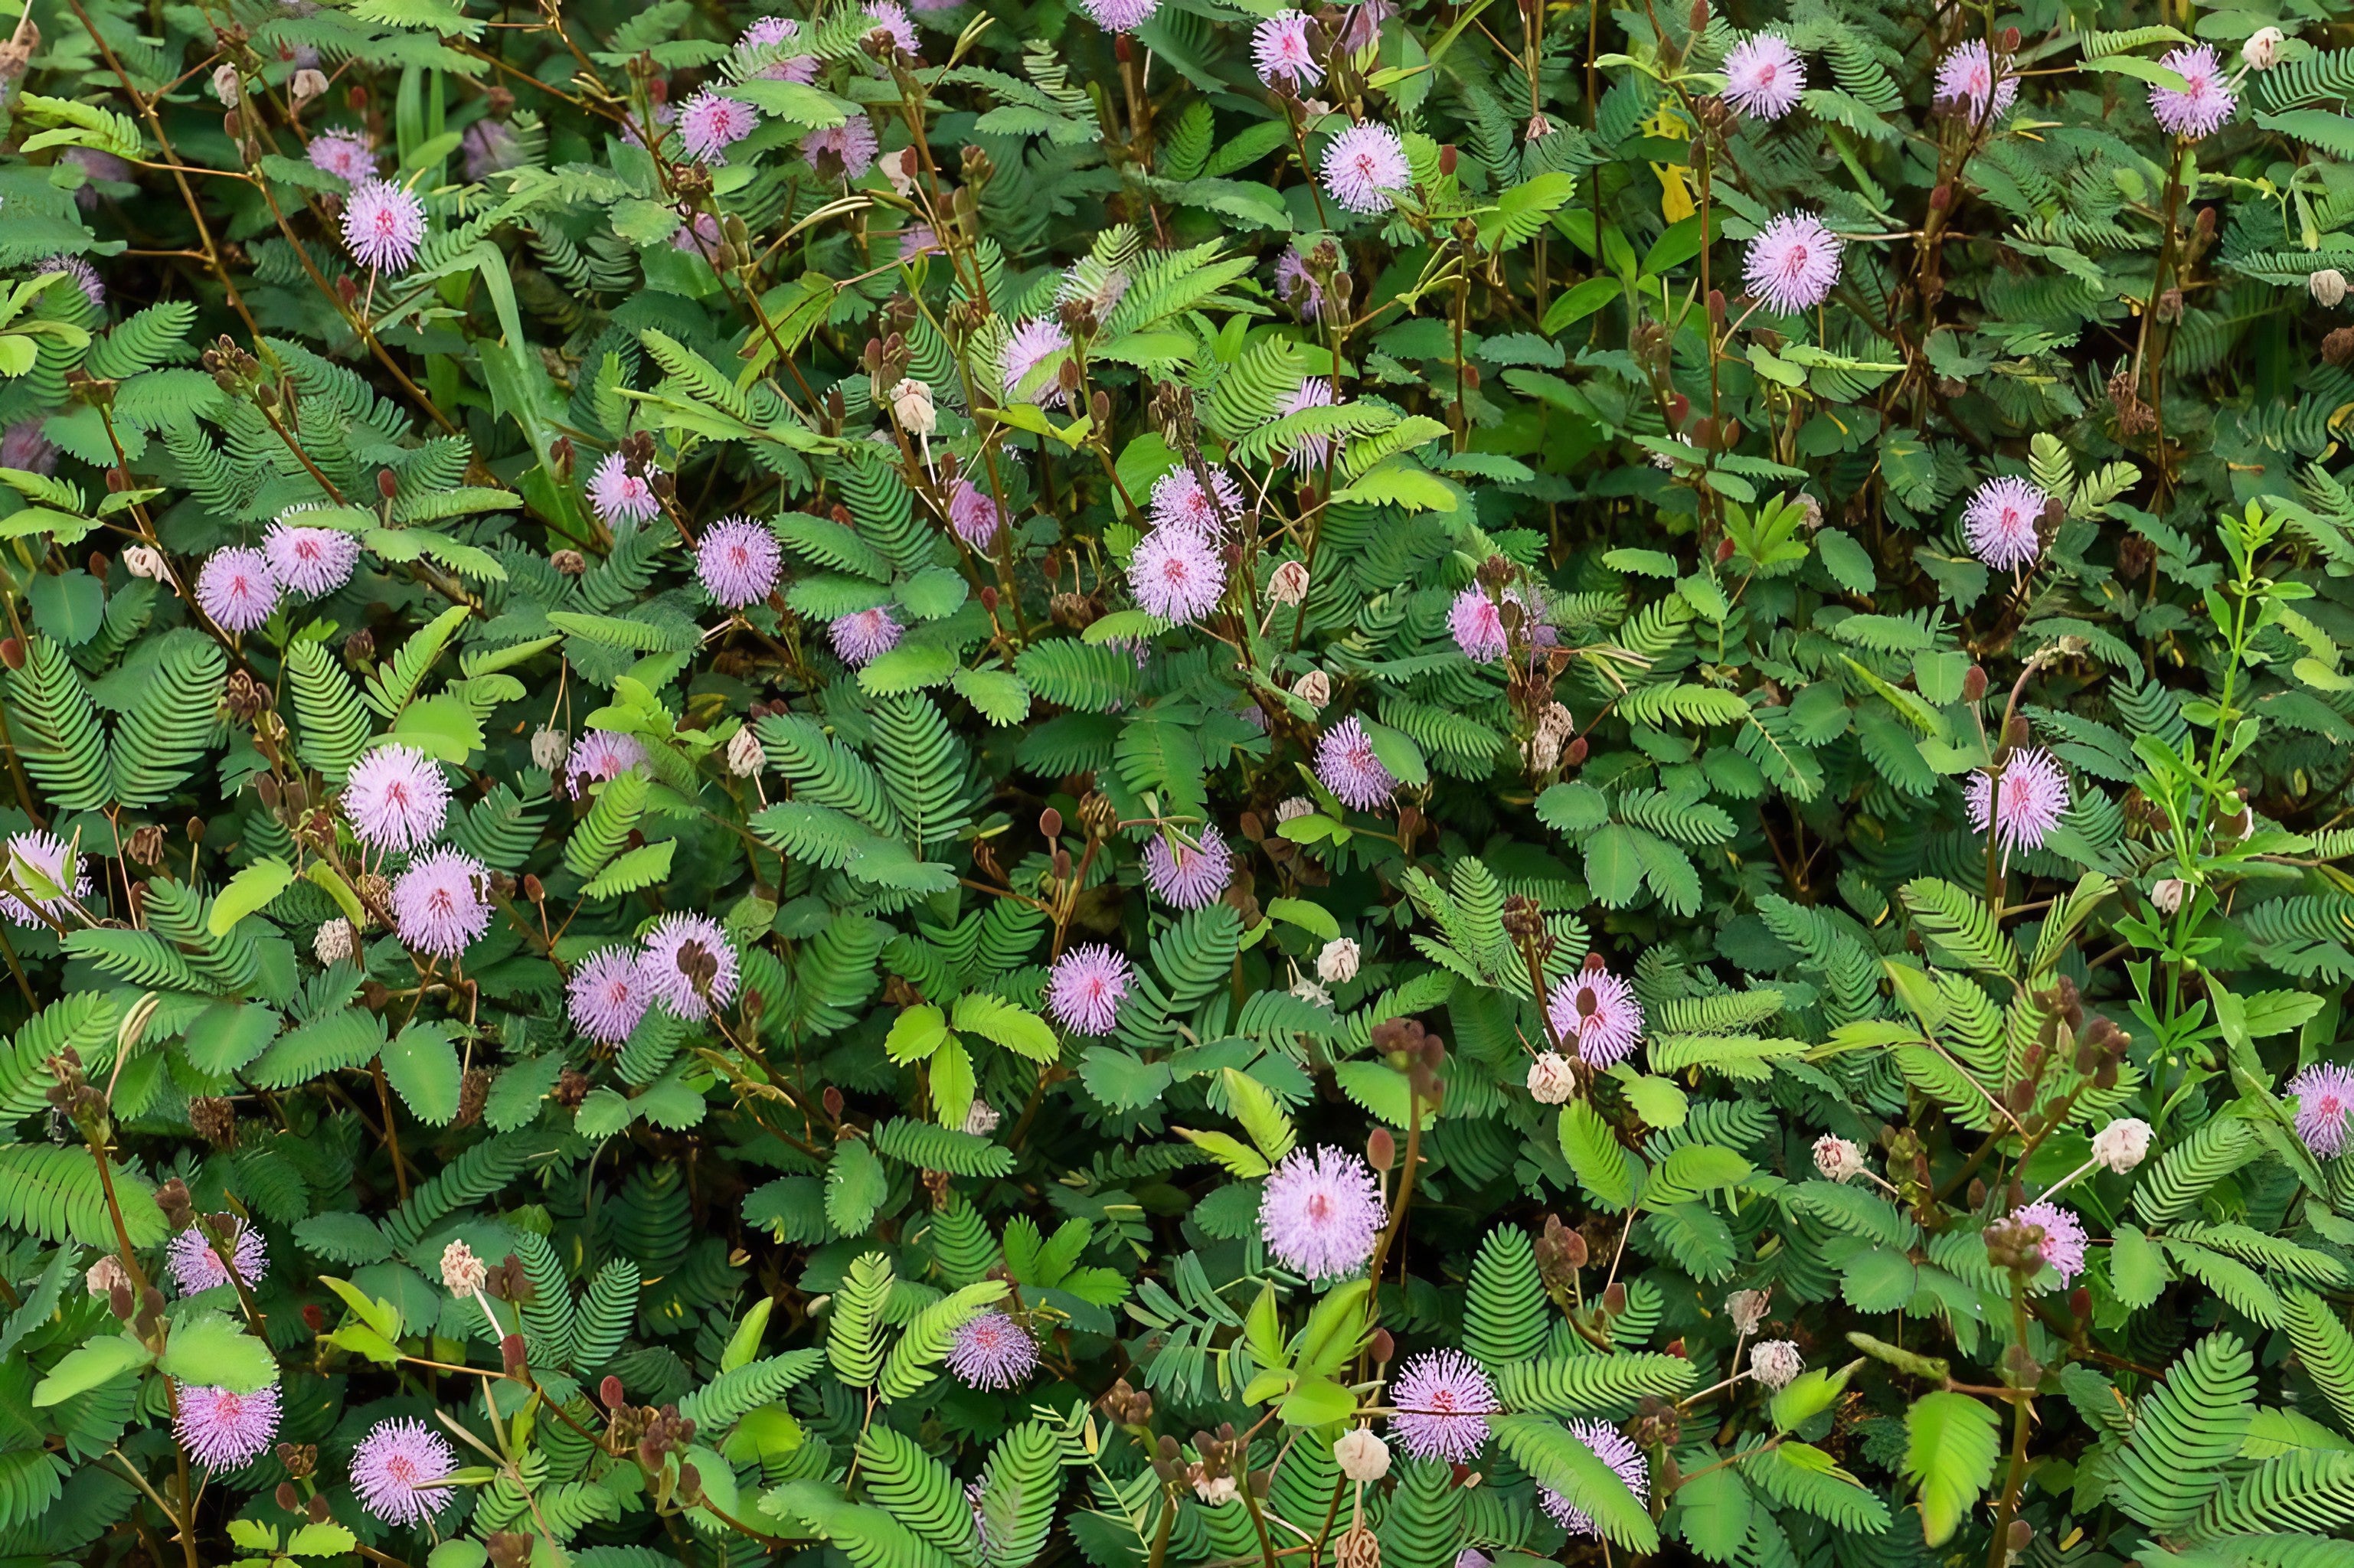 Dense Mimosa Pudica shrub adorned with purple blooms and verdant leaves